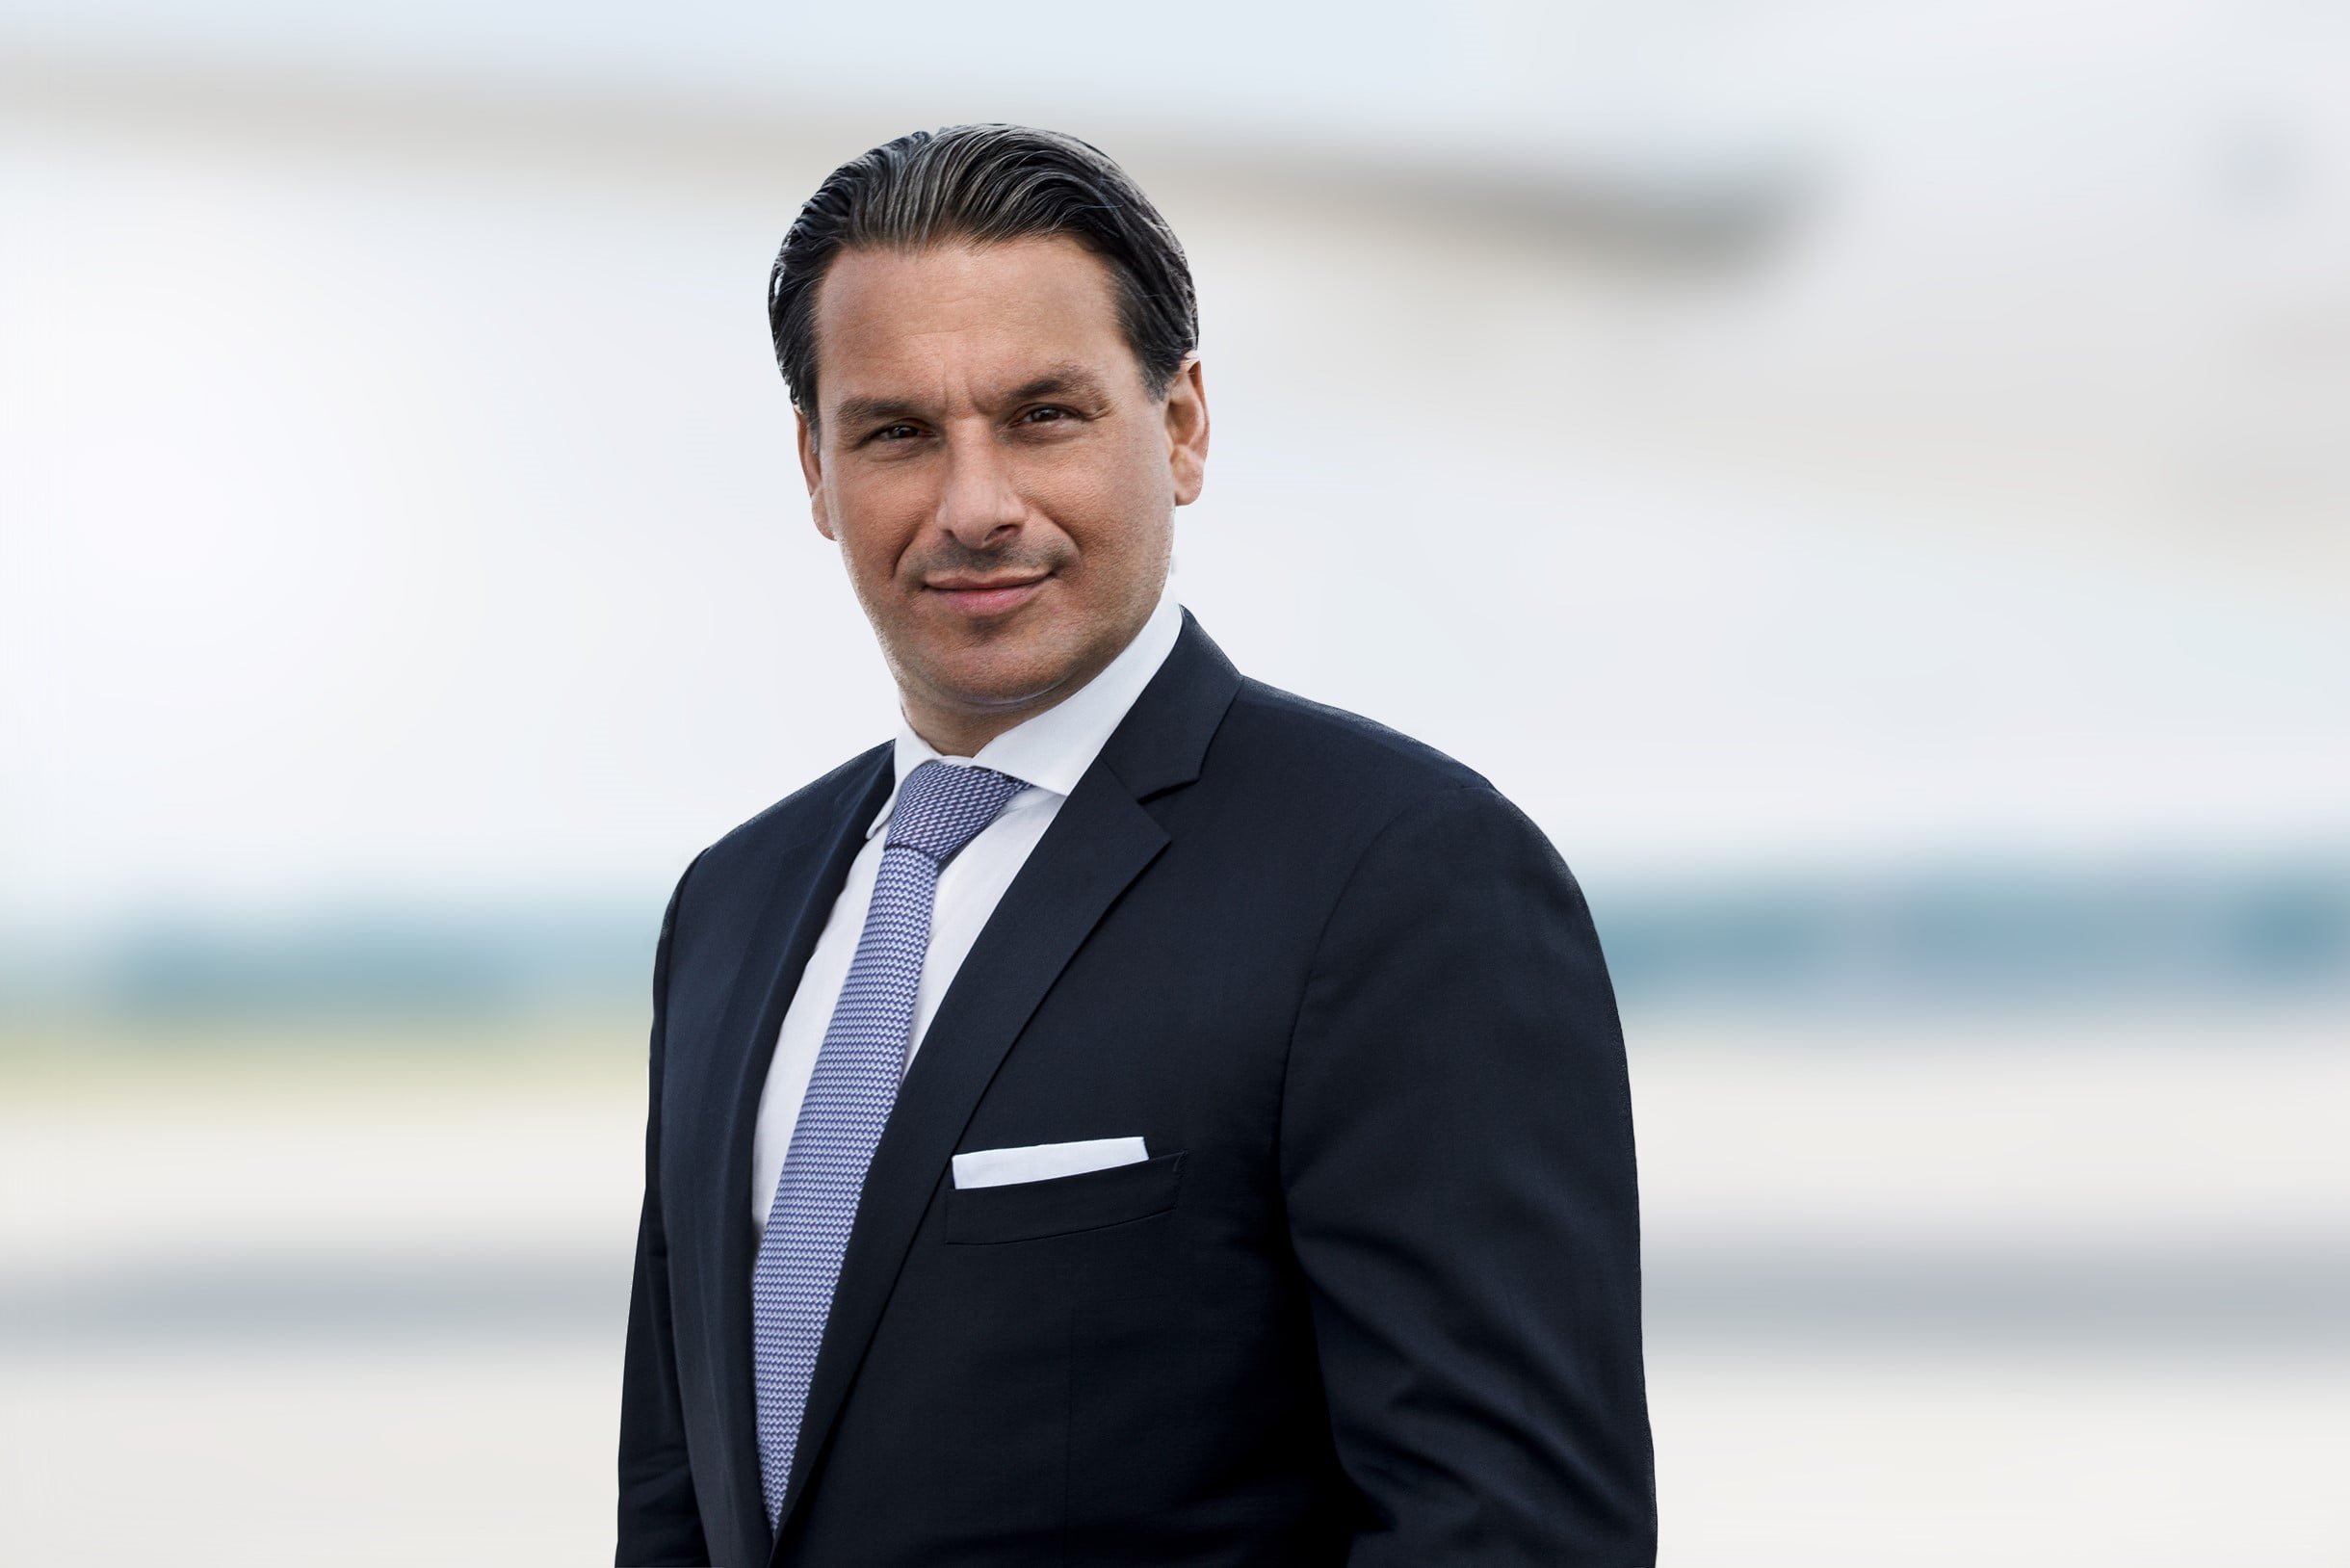 Change in top management at Lufthansa Group